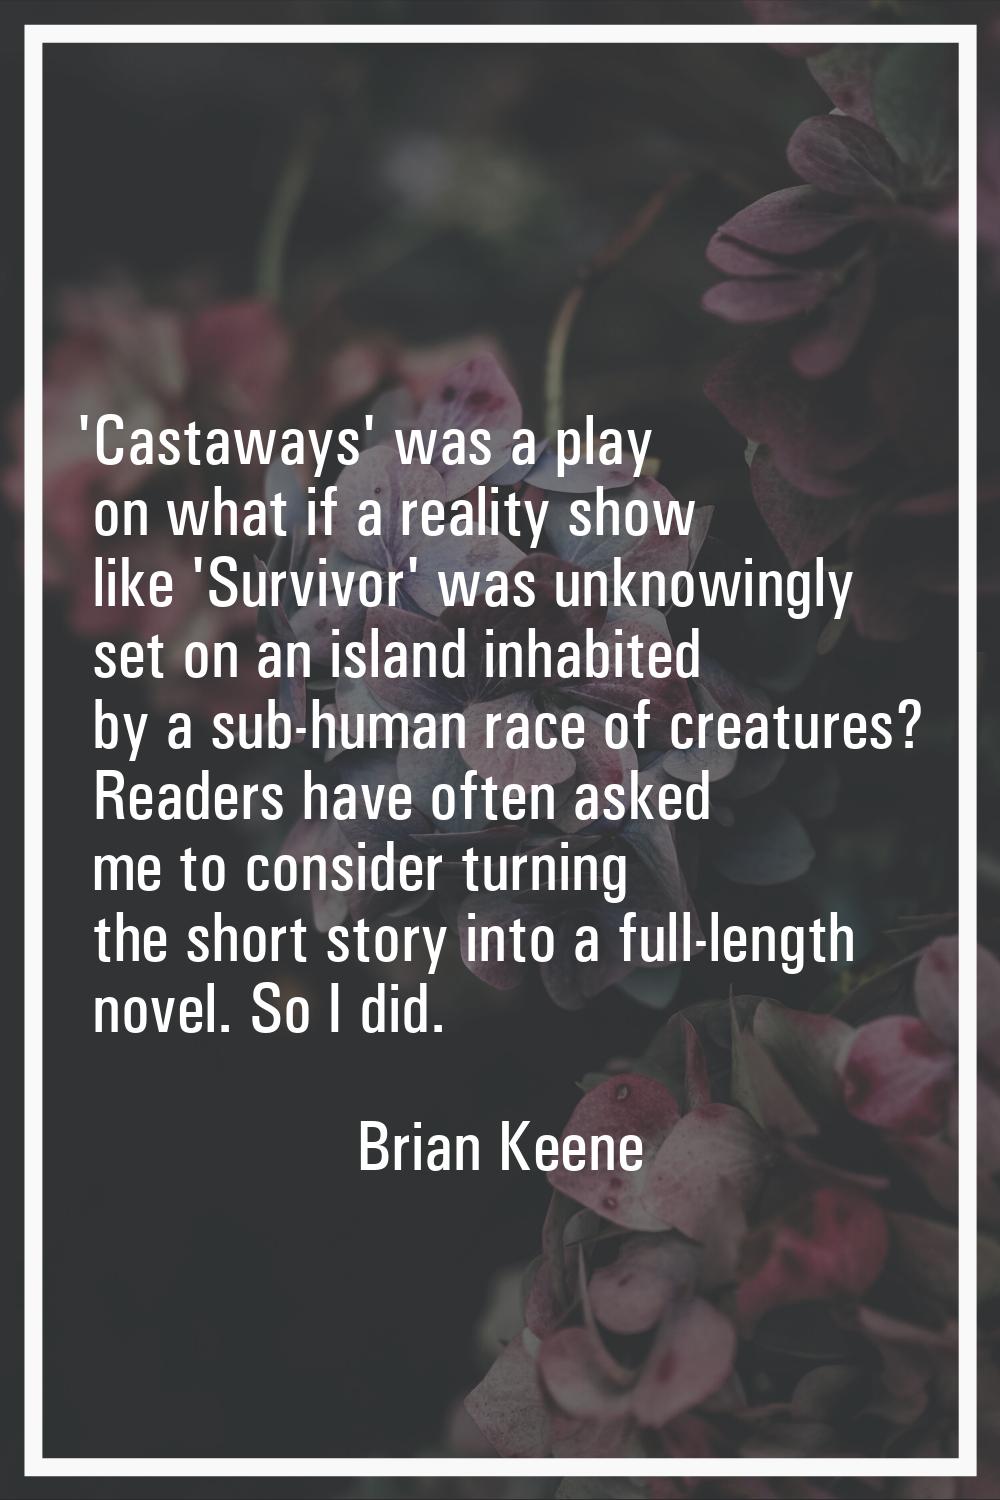 'Castaways' was a play on what if a reality show like 'Survivor' was unknowingly set on an island i